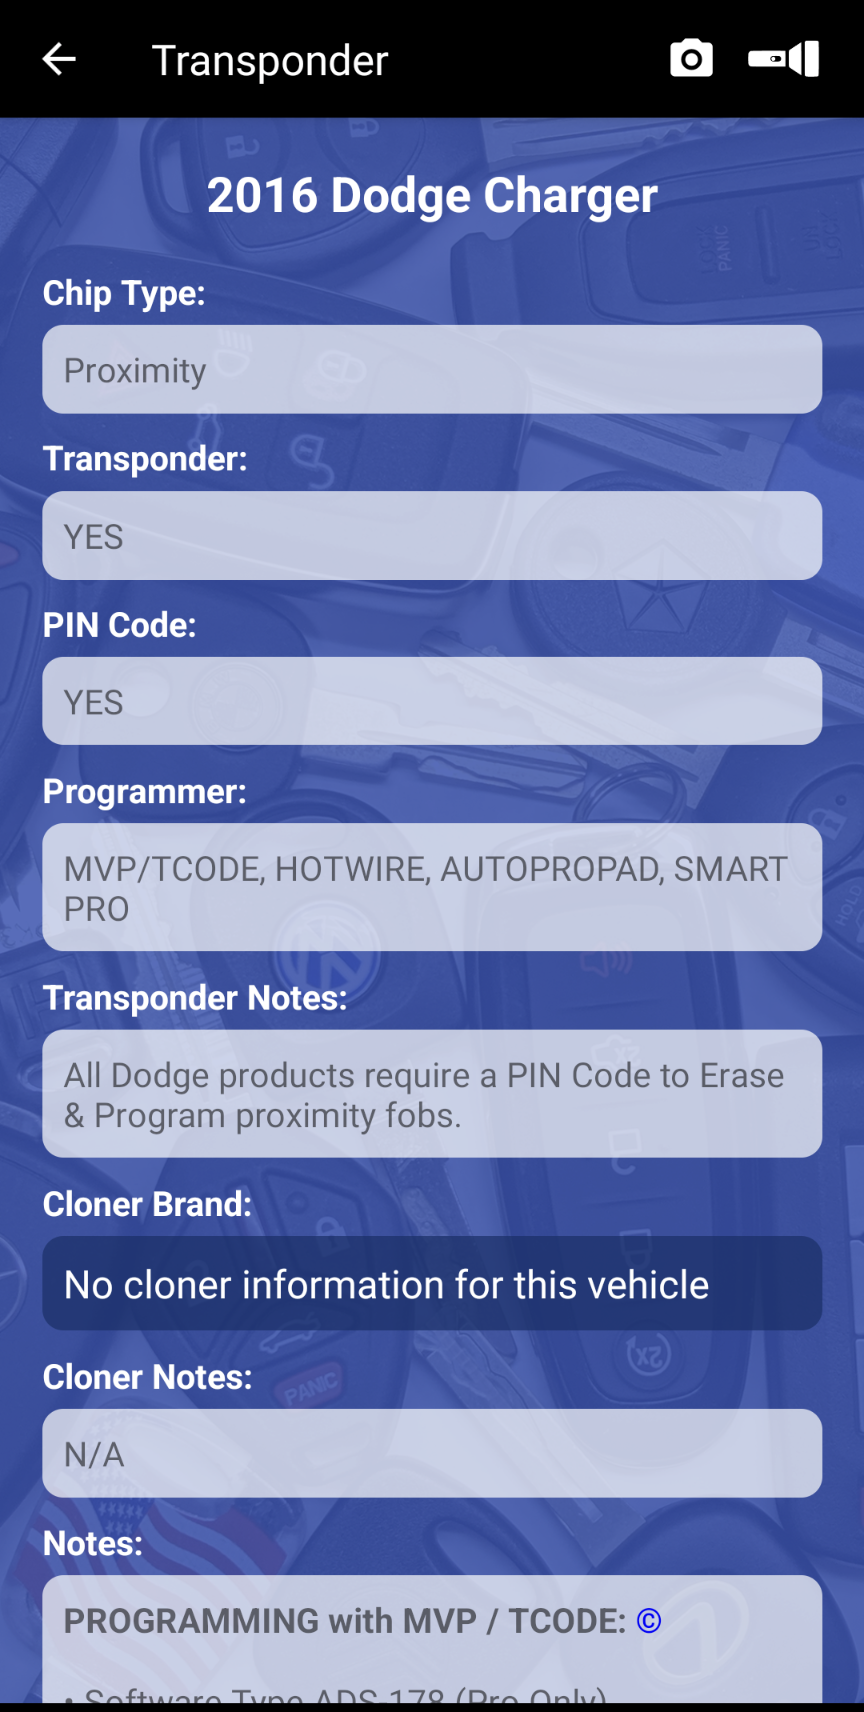 FOUR Pack of MyAutoSmart Mobile for the iPhone, iPad or Android Smartphone or Tablet - New User or Renewal - AutoSmart Advisor